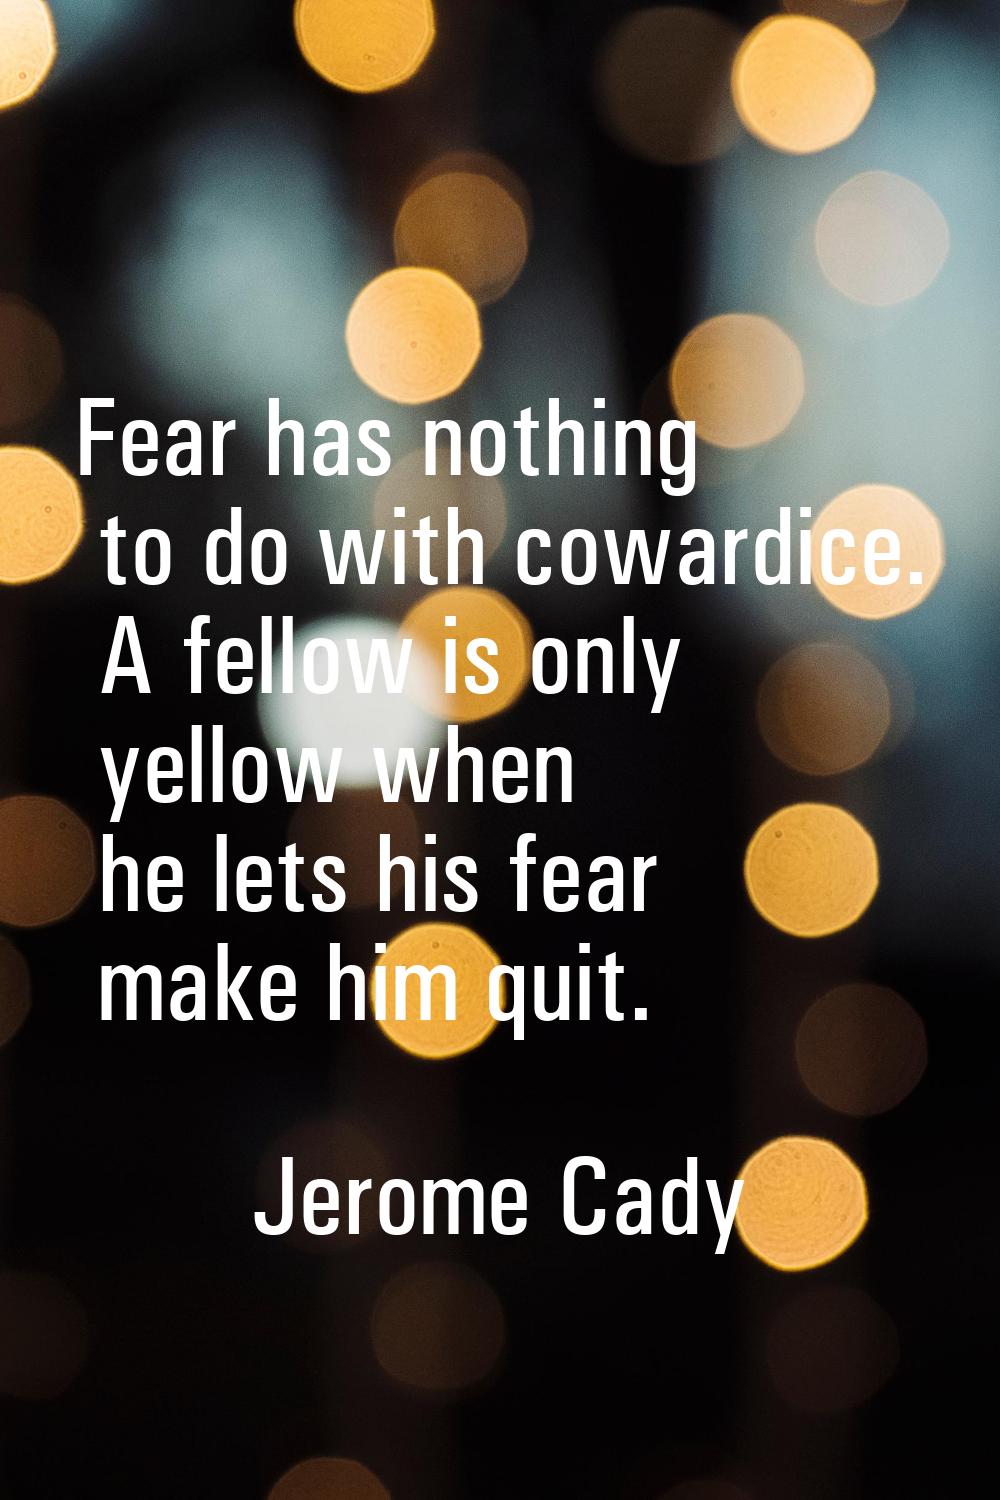 Fear has nothing to do with cowardice. A fellow is only yellow when he lets his fear make him quit.